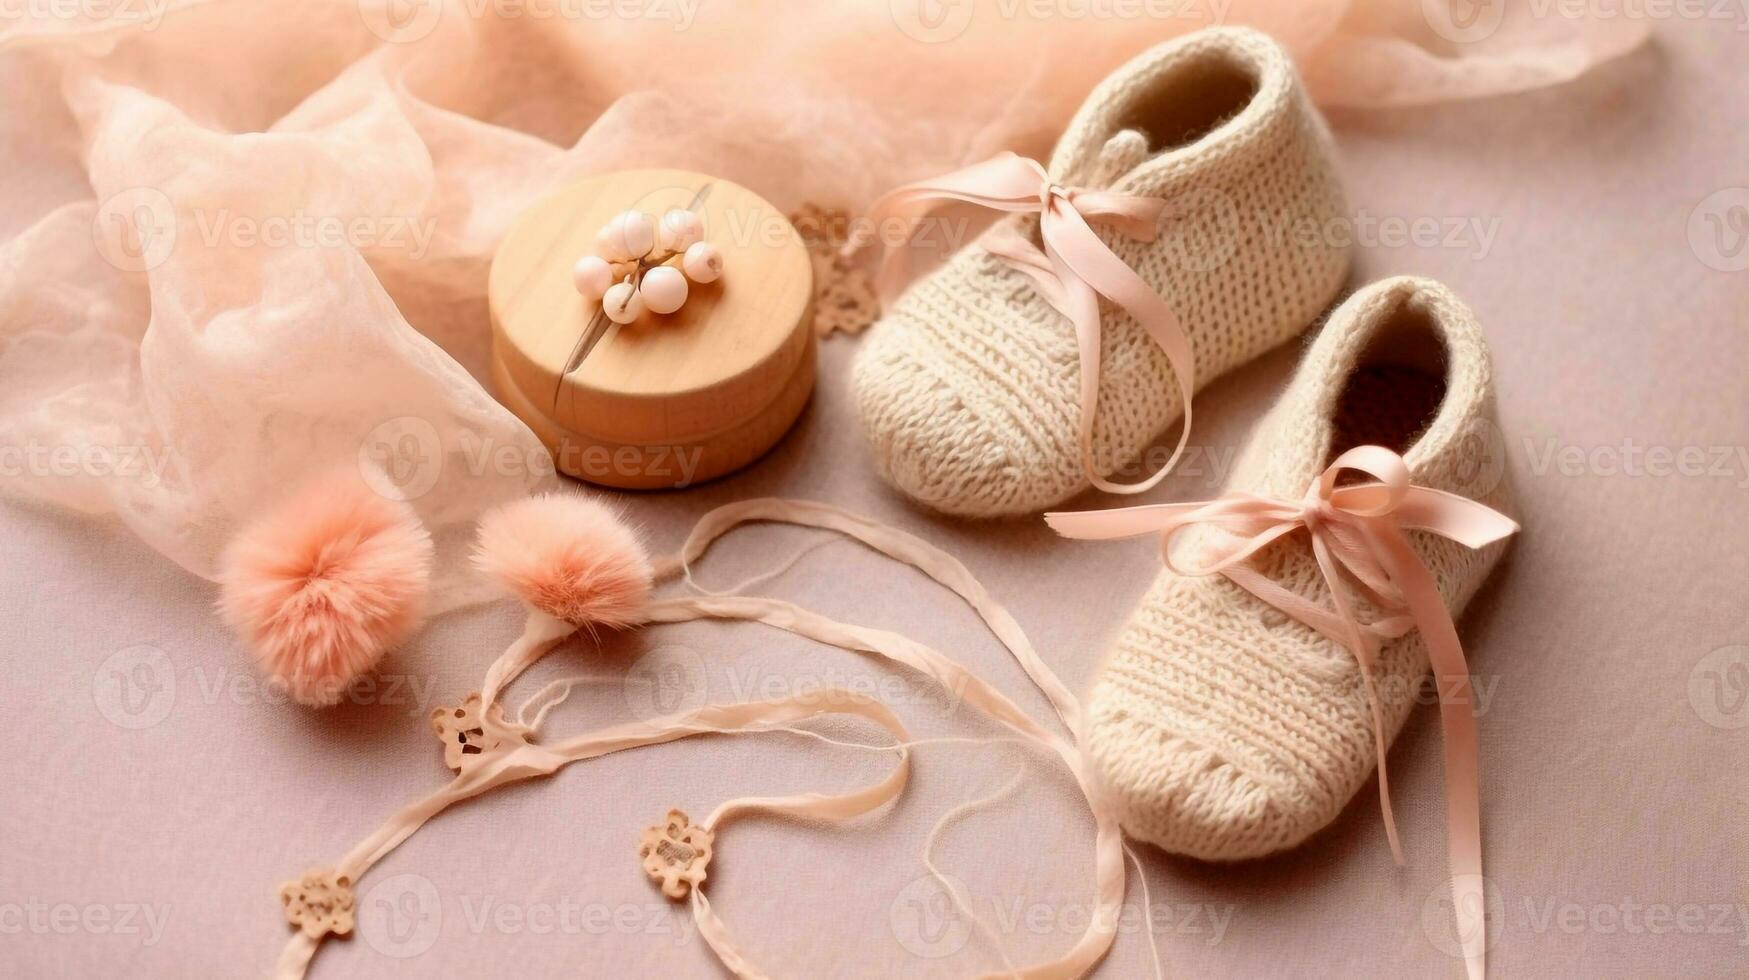 knitting for a newborn, crochet.booties, dress top view on a soft beige background,tenderness,knitting needles,baby legs,lace ribbon and feathers in vintage style,AI generated photo